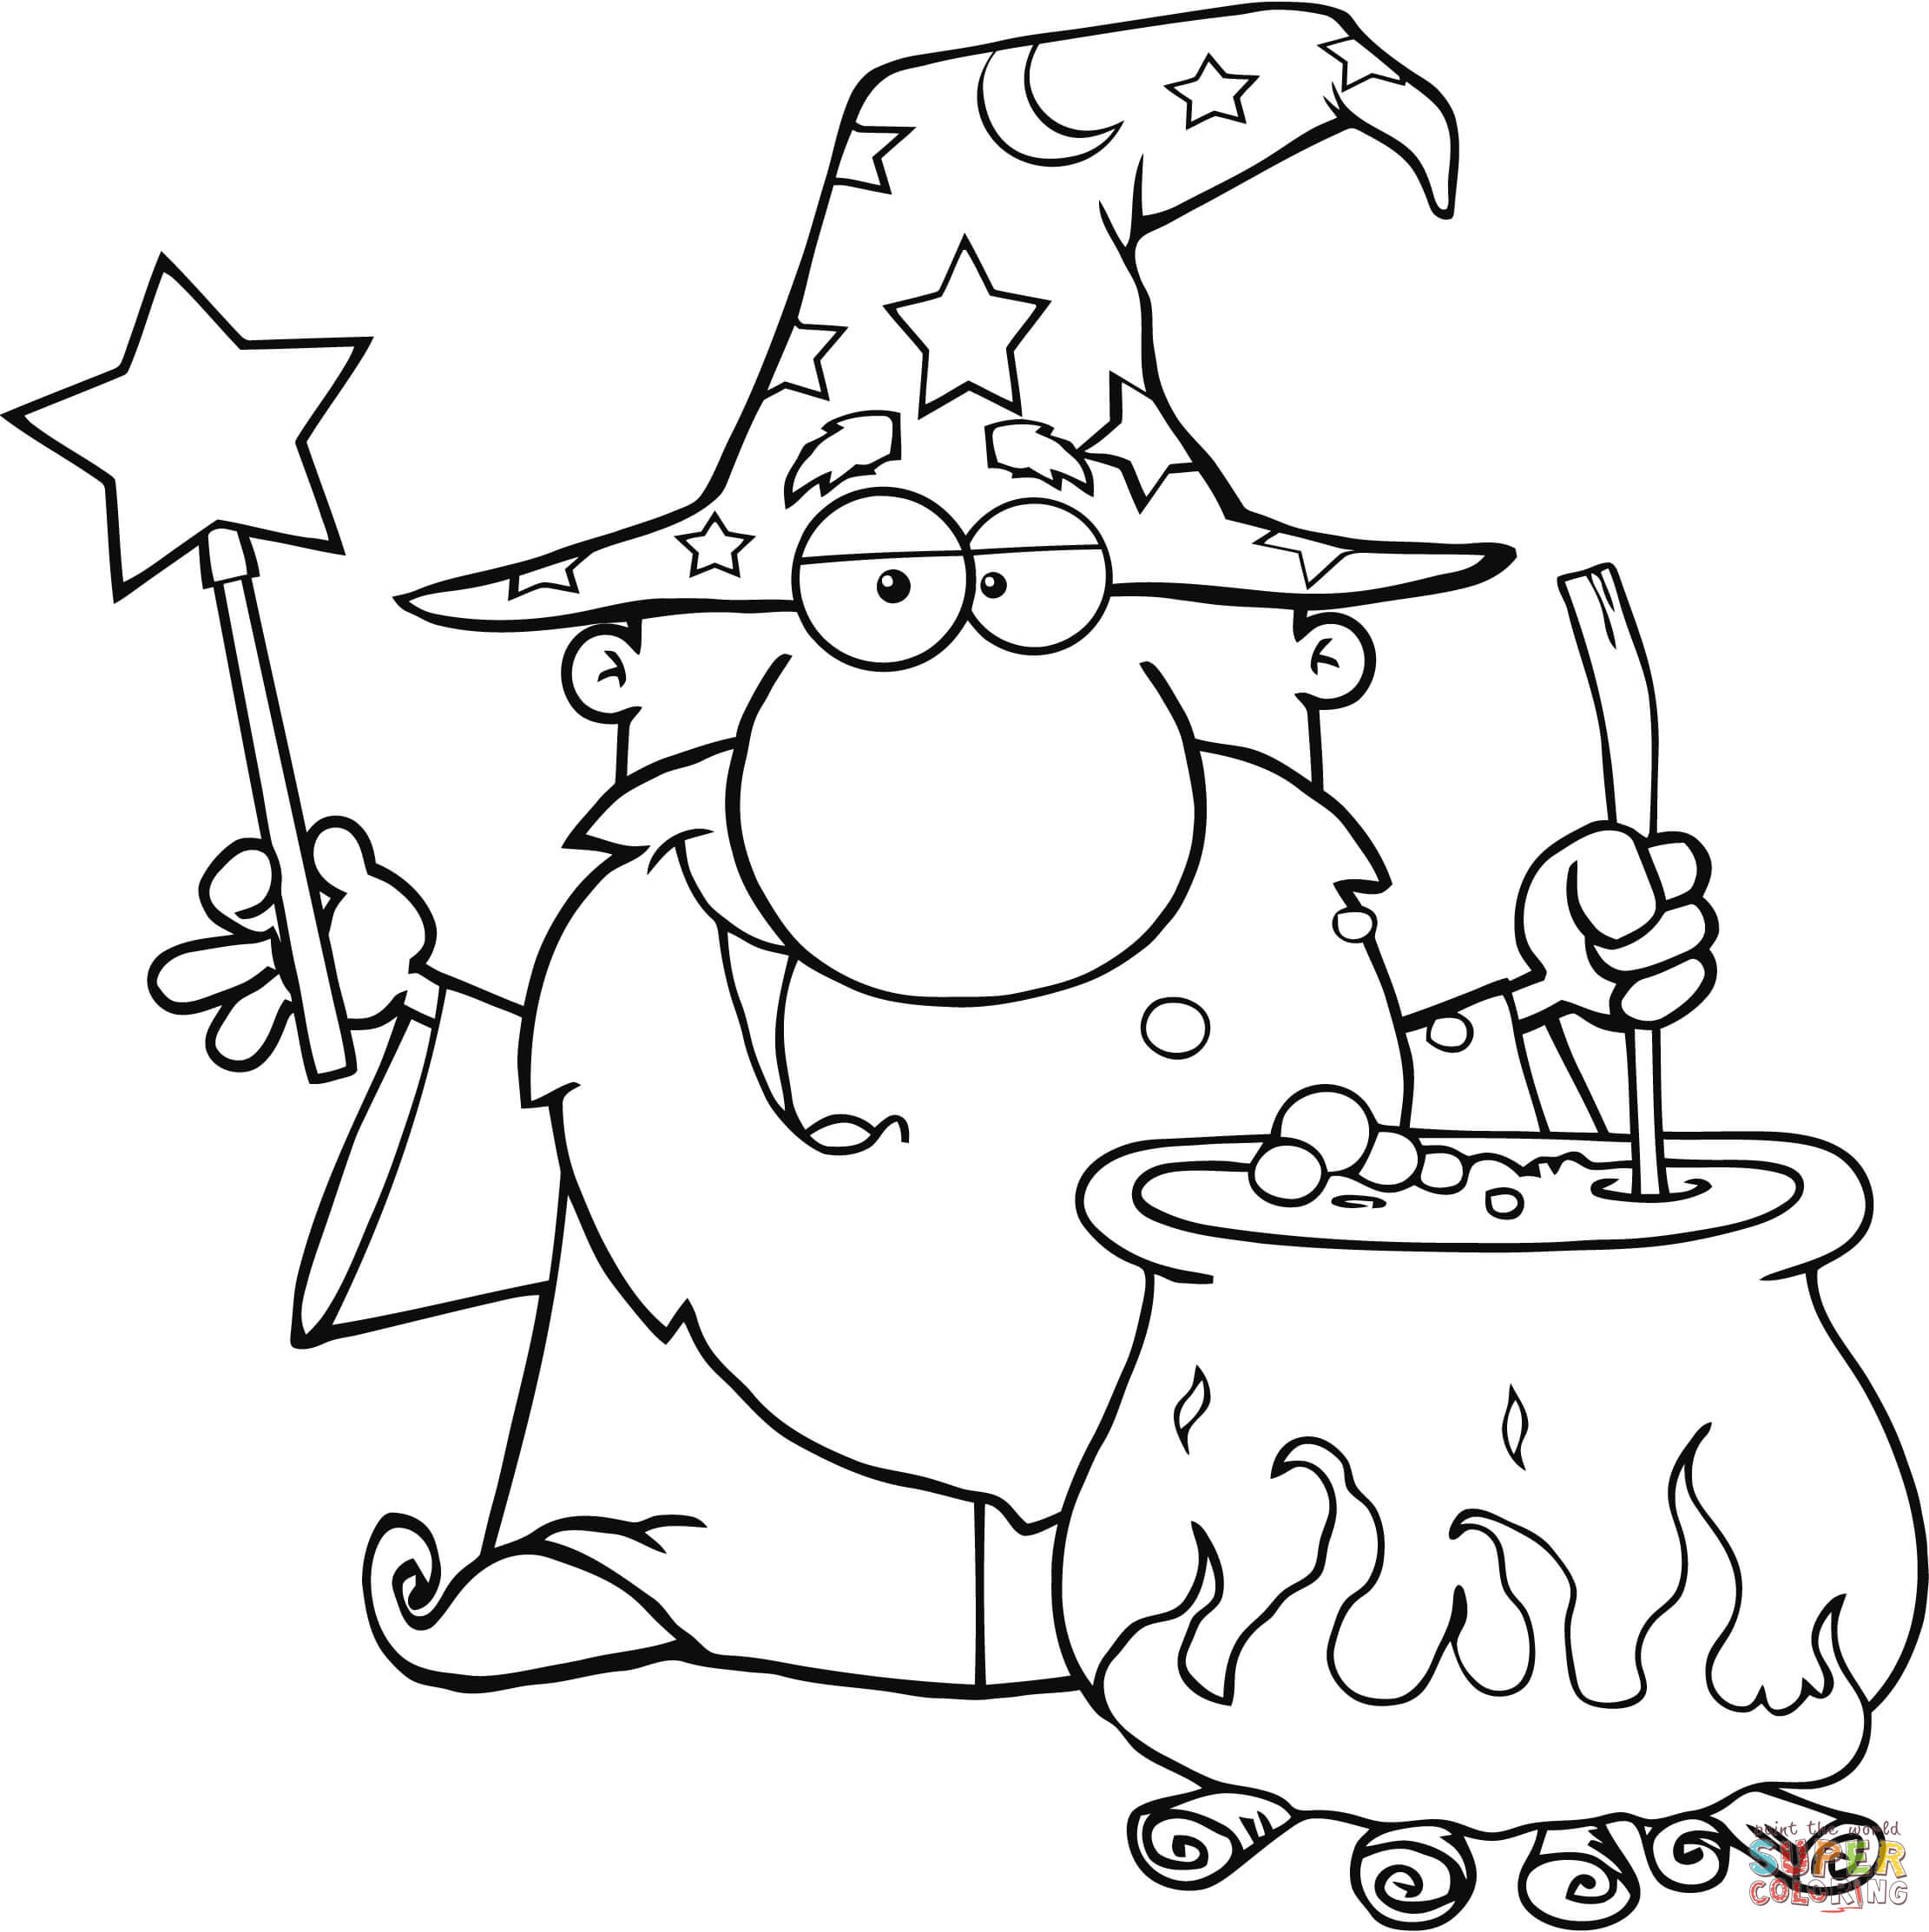 Wizard Waving with Magic Wand and Preparing a Potion coloring page | Free  Printable Coloring Pages